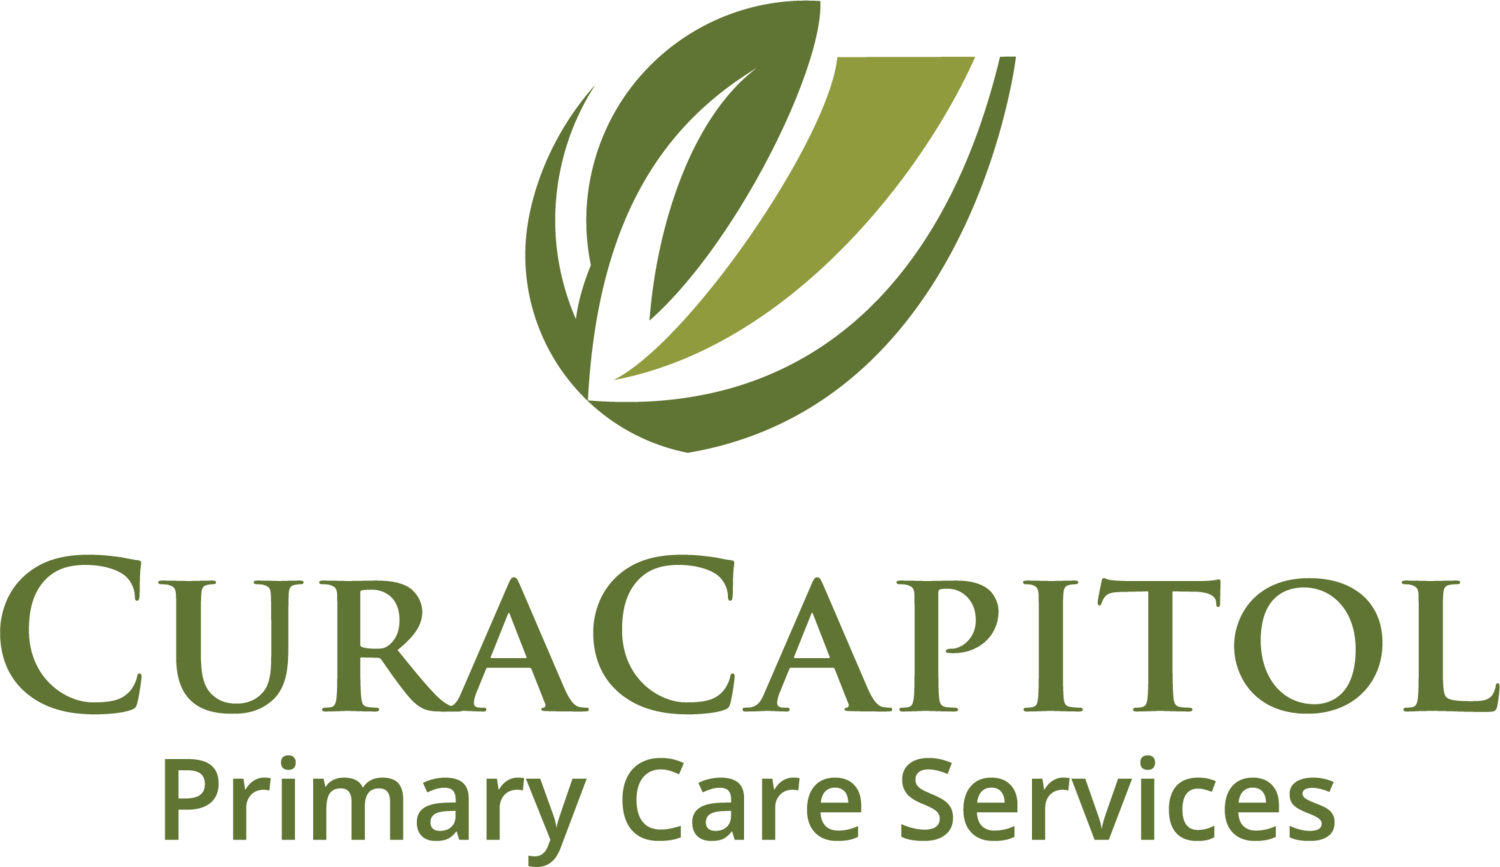 CuraCapitol Primary Care Services